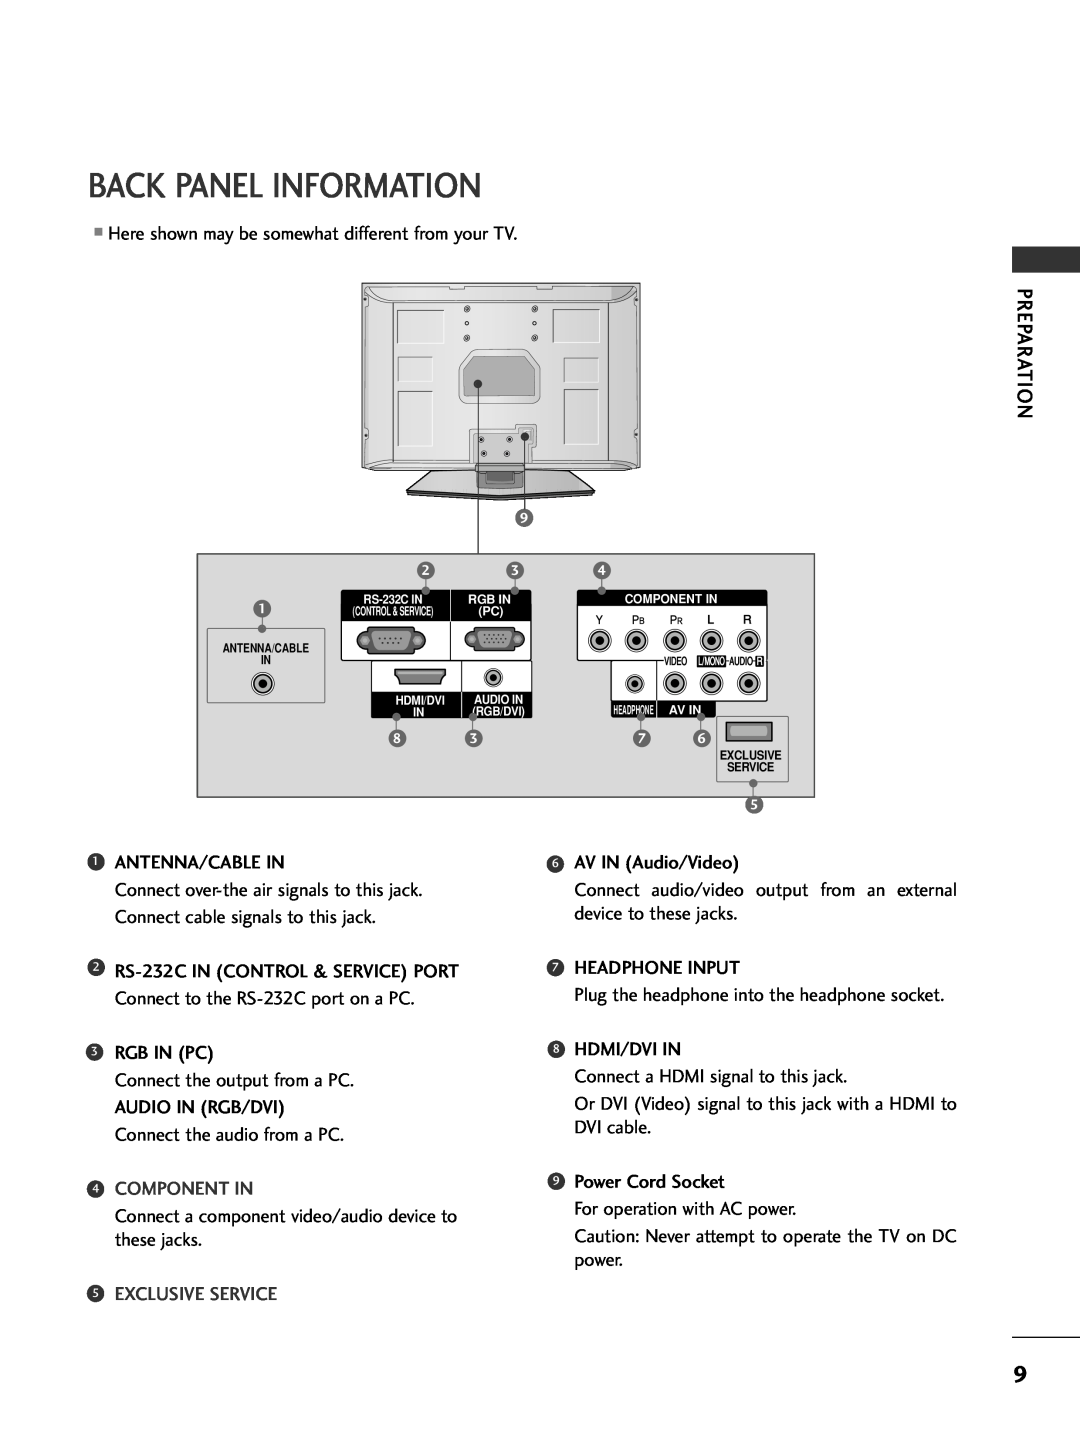 LG Electronics 32PC5DVC owner manual Back Panel Information, Component In, Exclusive Service 